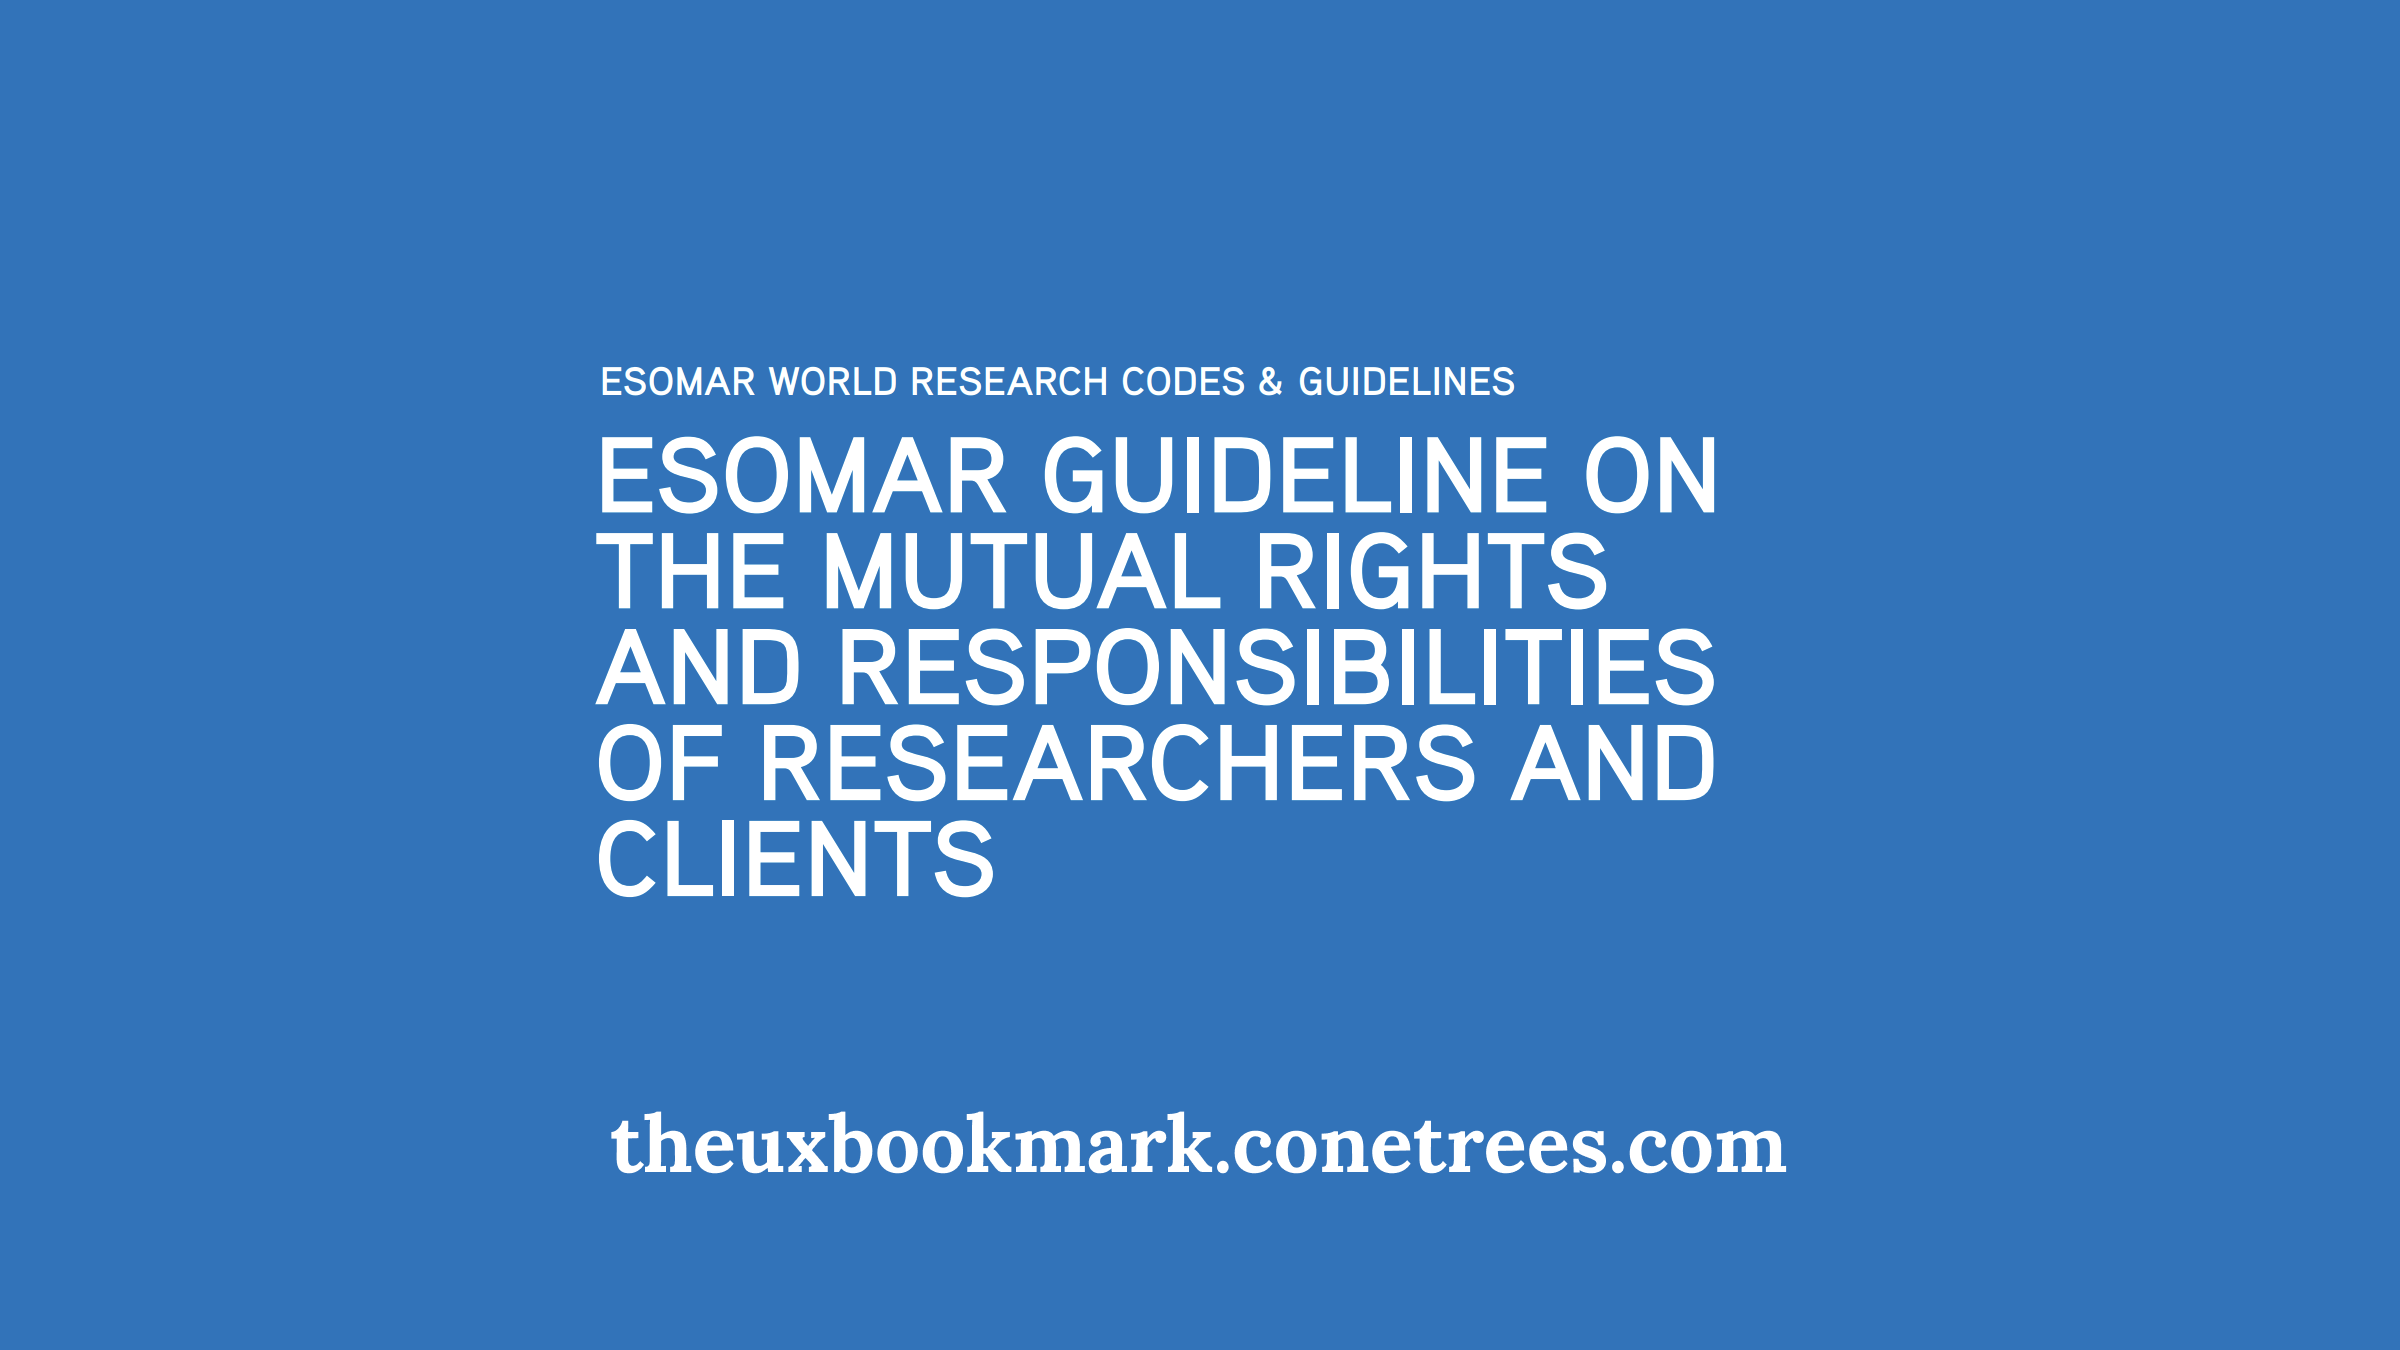 ESOMAR Guidelines on the Mutual Rights and Responsibilities of Researchers and Clients